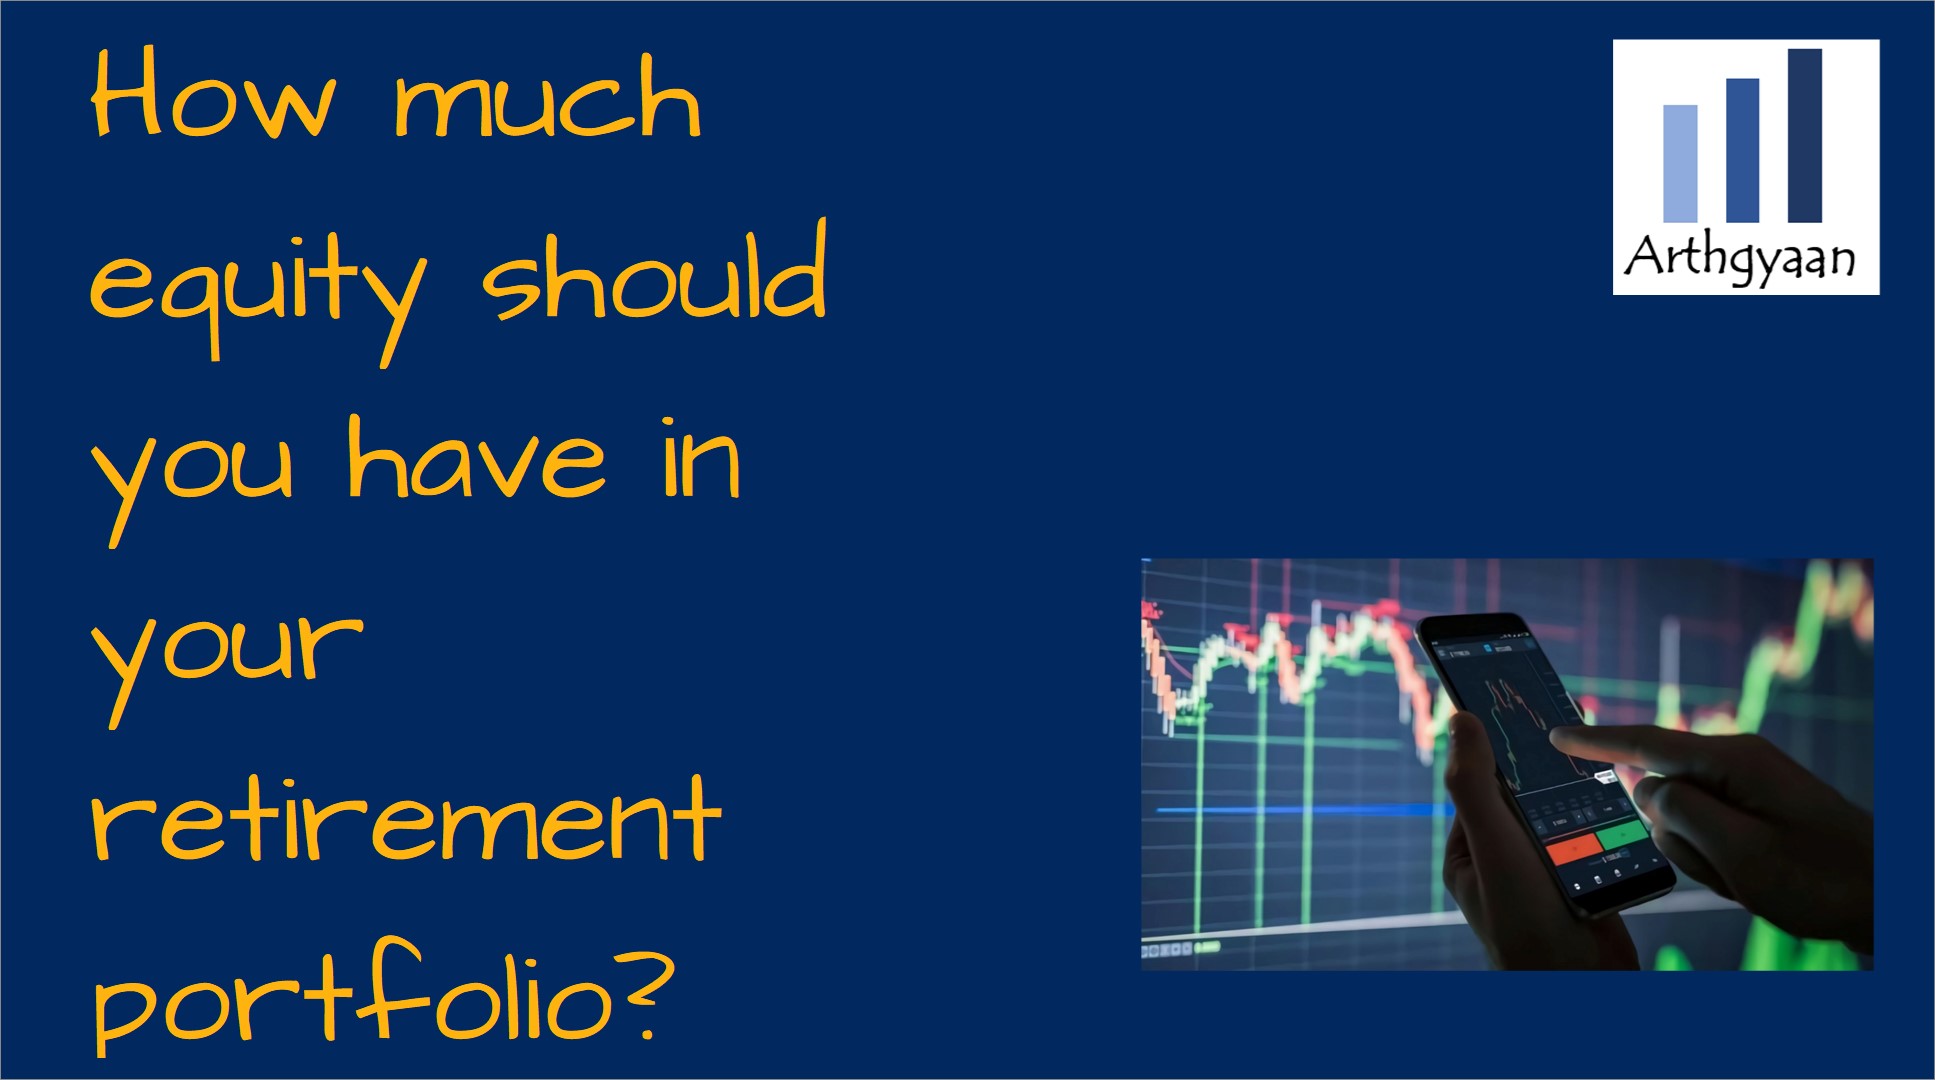 How much equity should you have in your retirement portfolio?